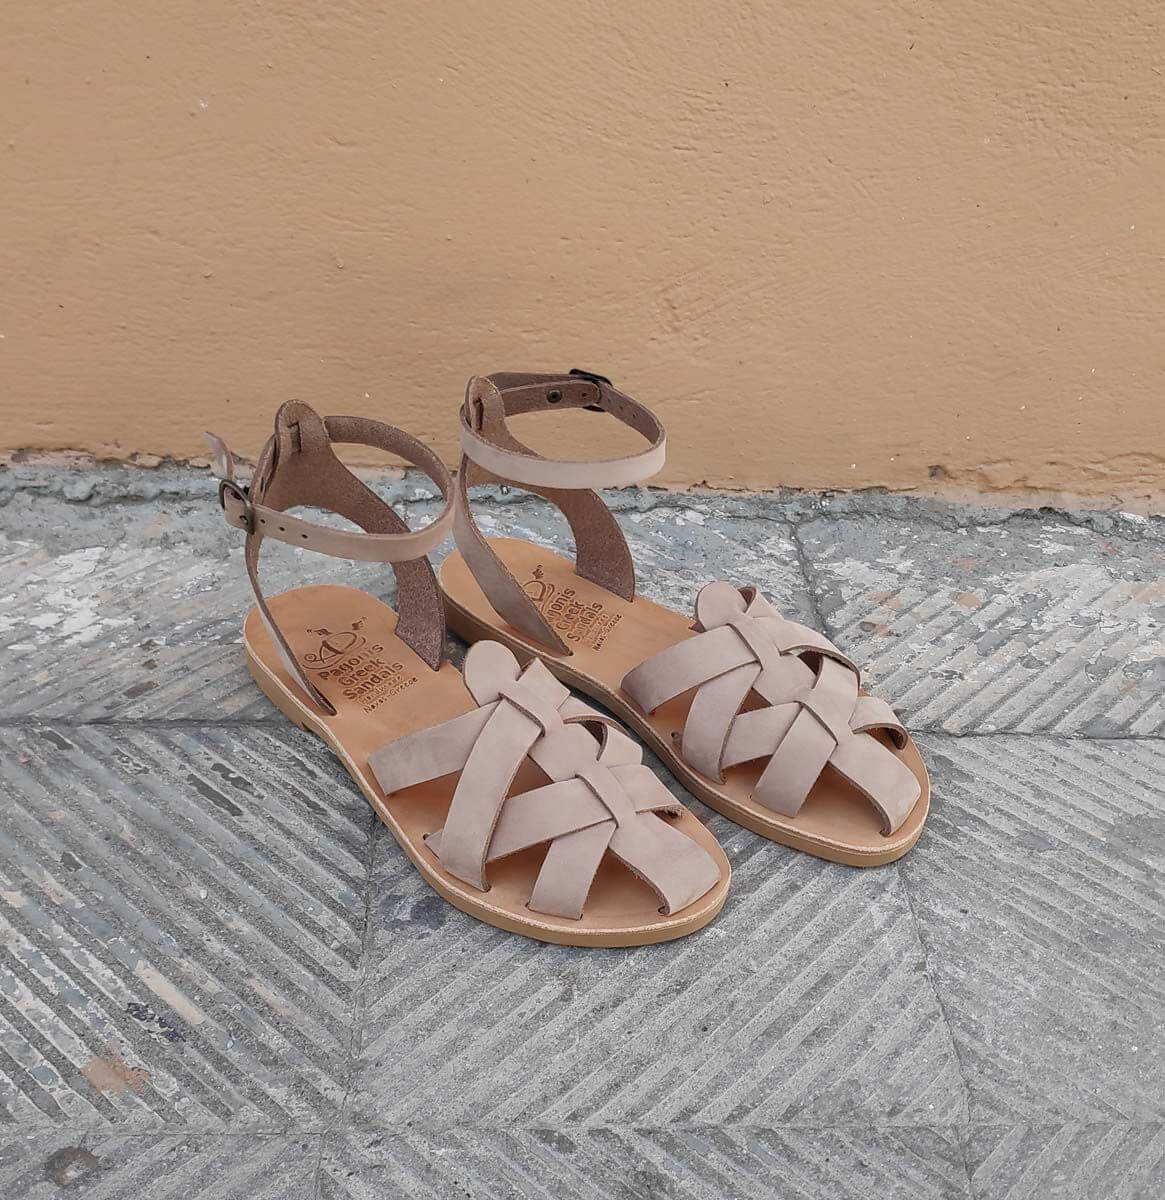 Lefkoni Closed Toe Leather Sandals - Leather Sandals | Pagonis Greek Sandals